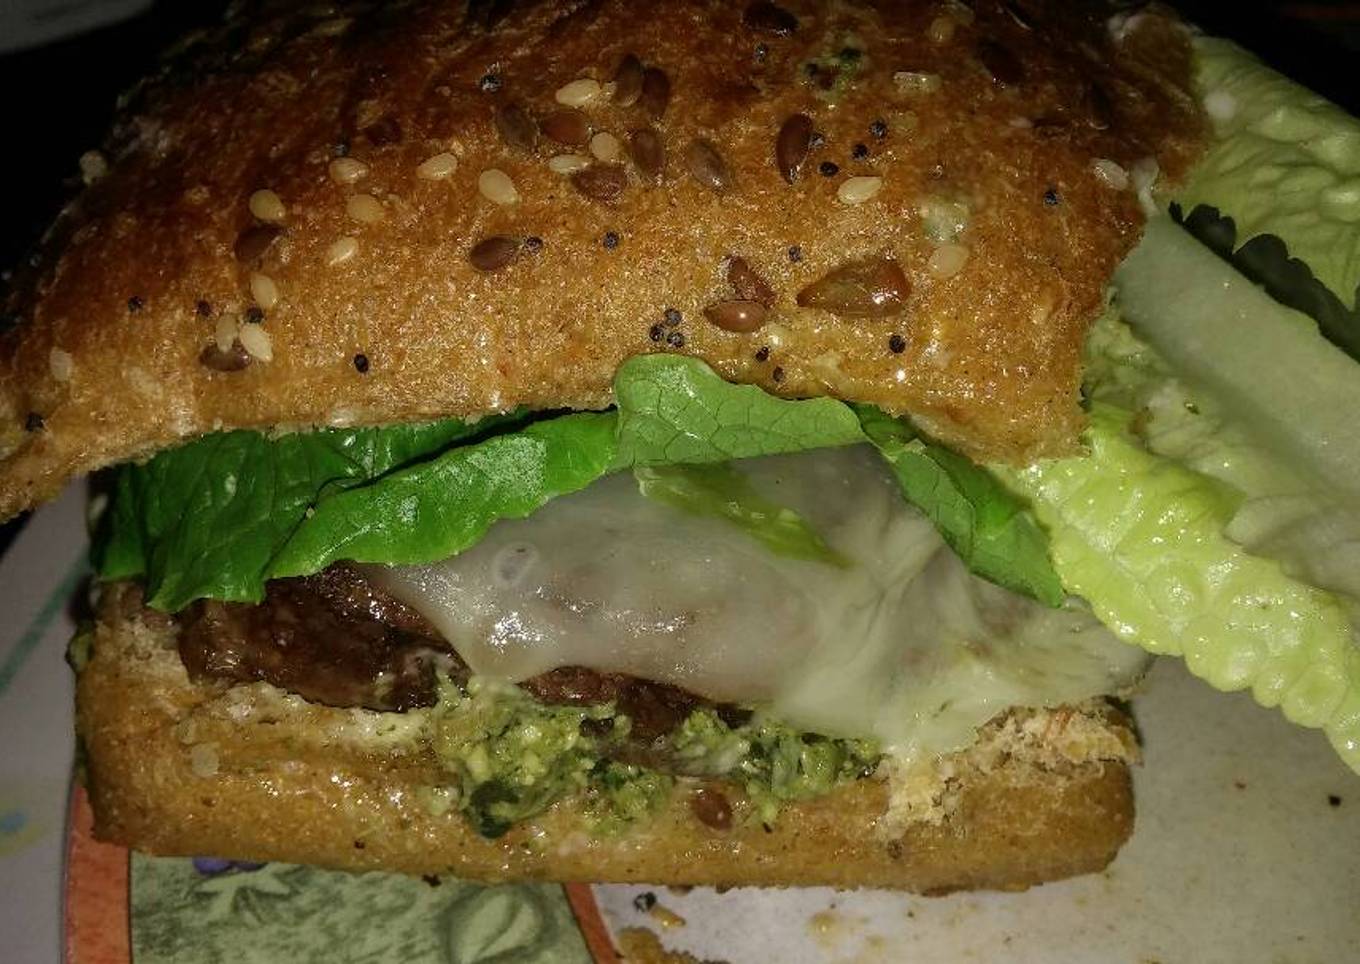 Michael's FLG (Finger Licking Good) Angus beef and basil Pesto cheeseburger with provolone and sun dried tomatoes